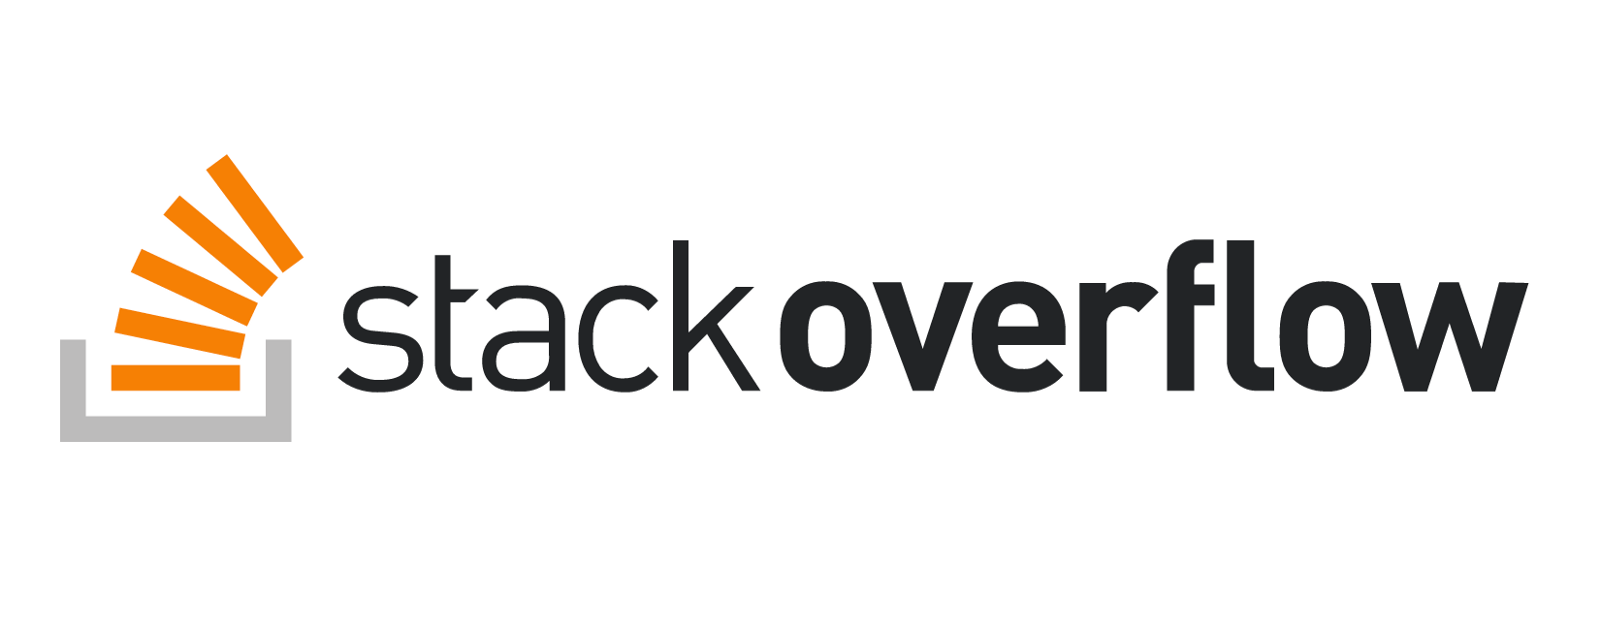 A Decade of Stack Overflow - Building a Place for Anyone Who CodesThumbnail